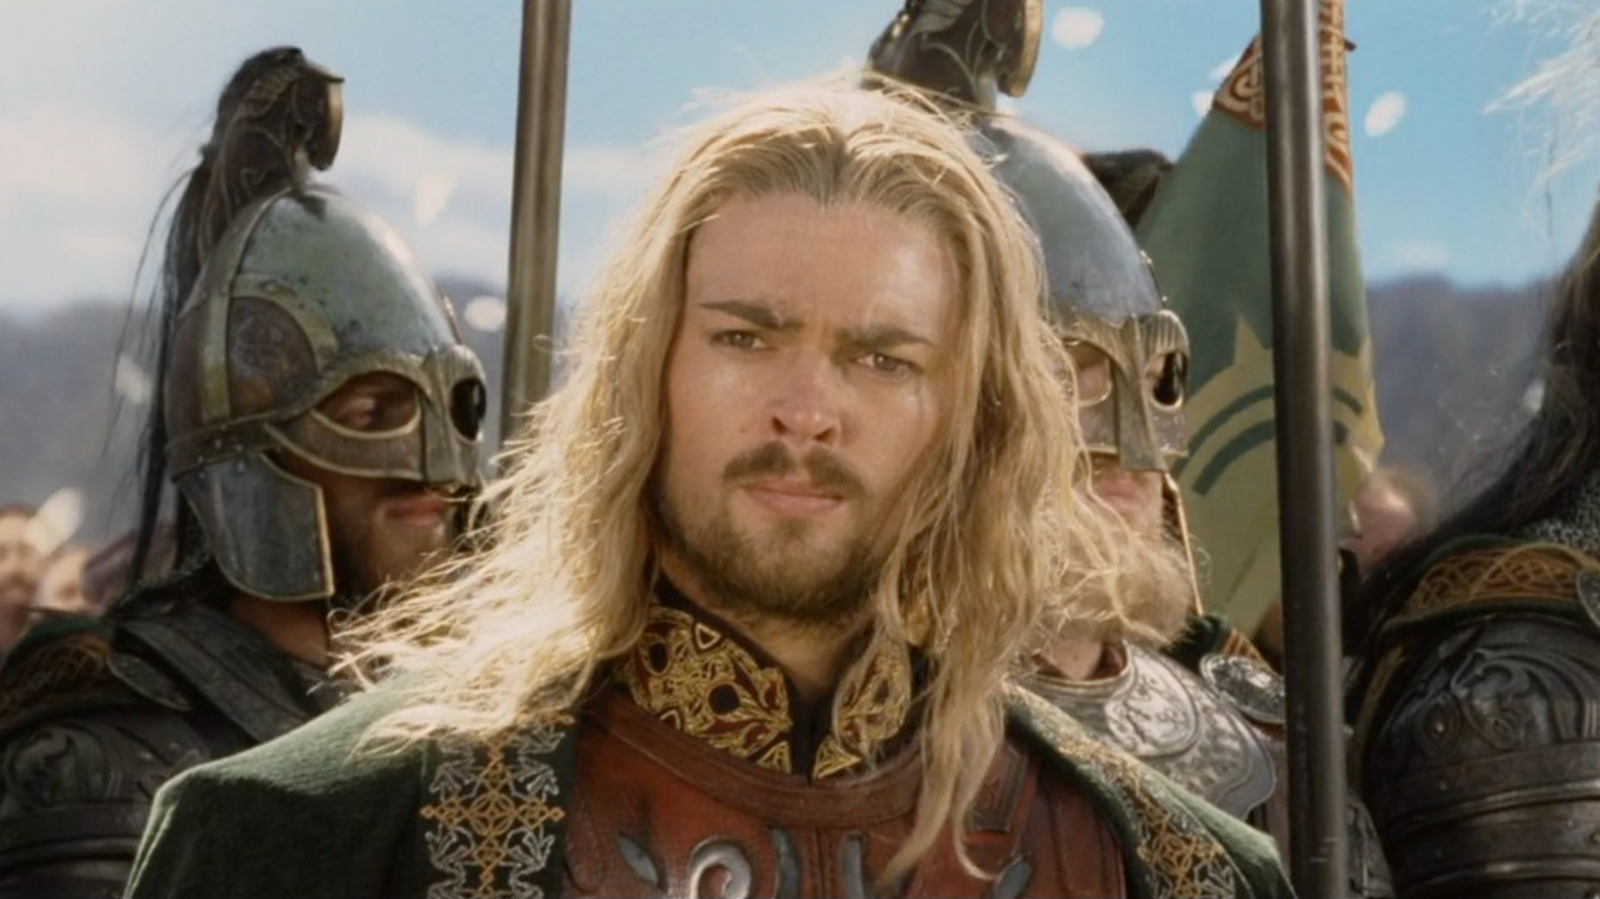 Karl Urban also starred as Éomer in The Lord of the Rings franchise.